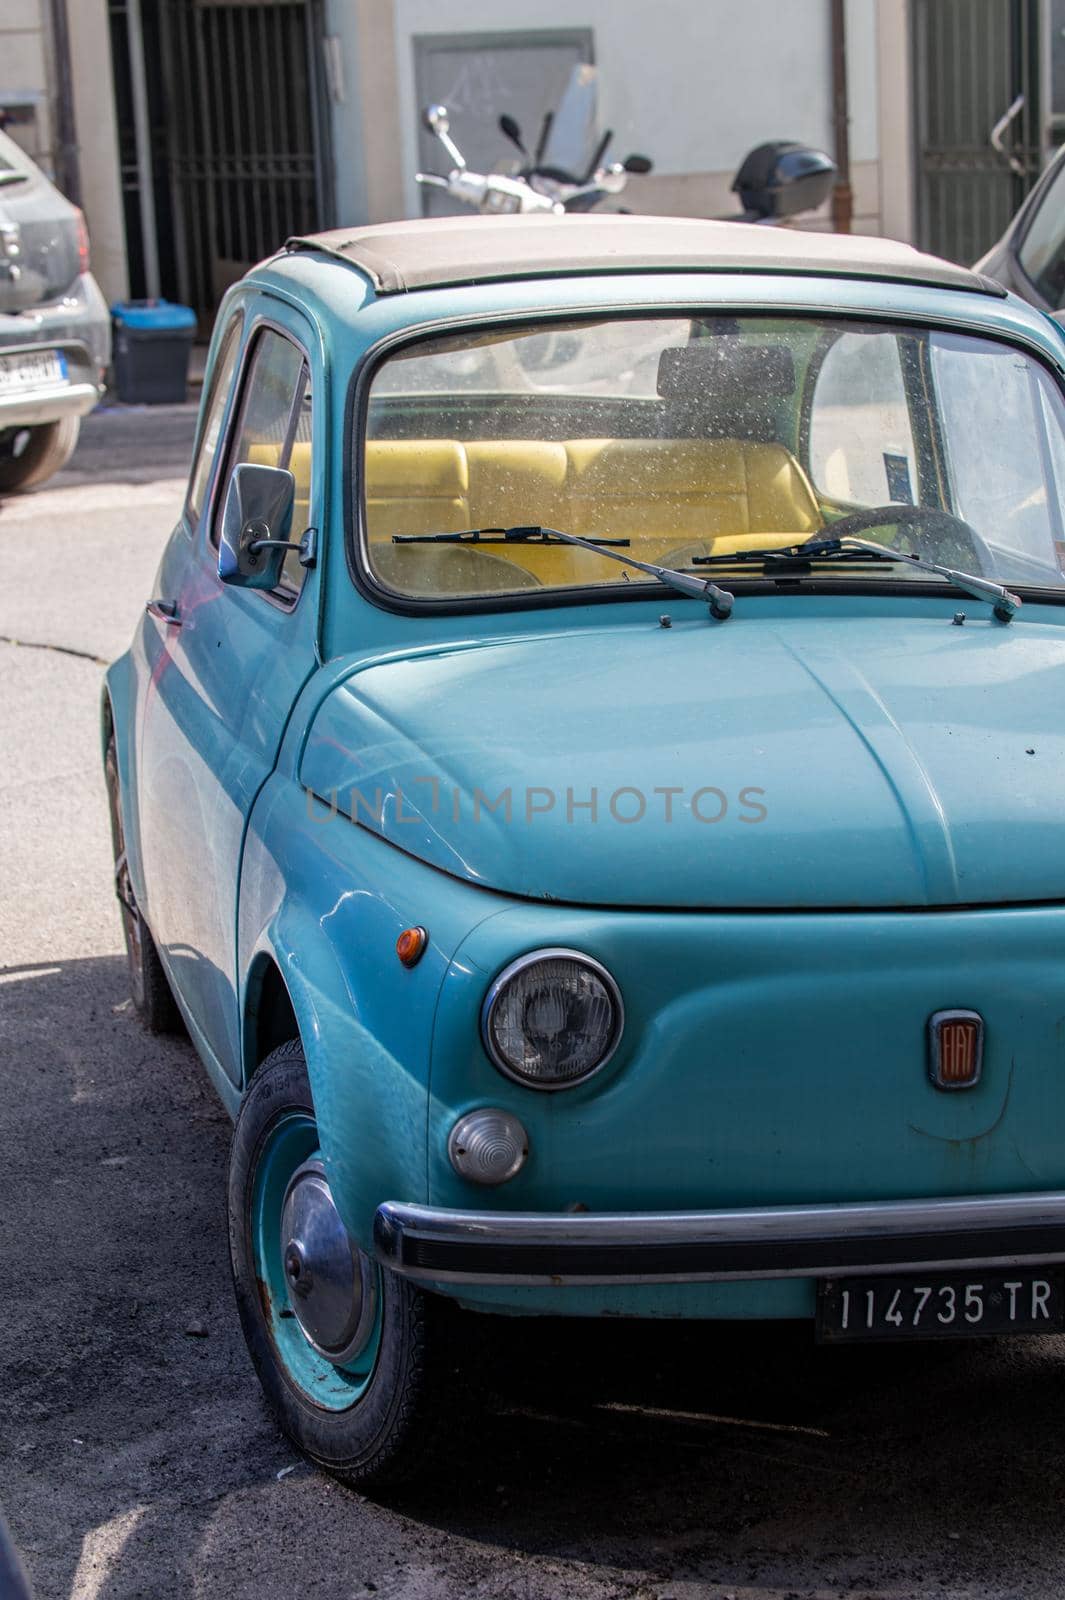 terni,italy june 22 2021:vintage fiat 500 from years ago on petrol